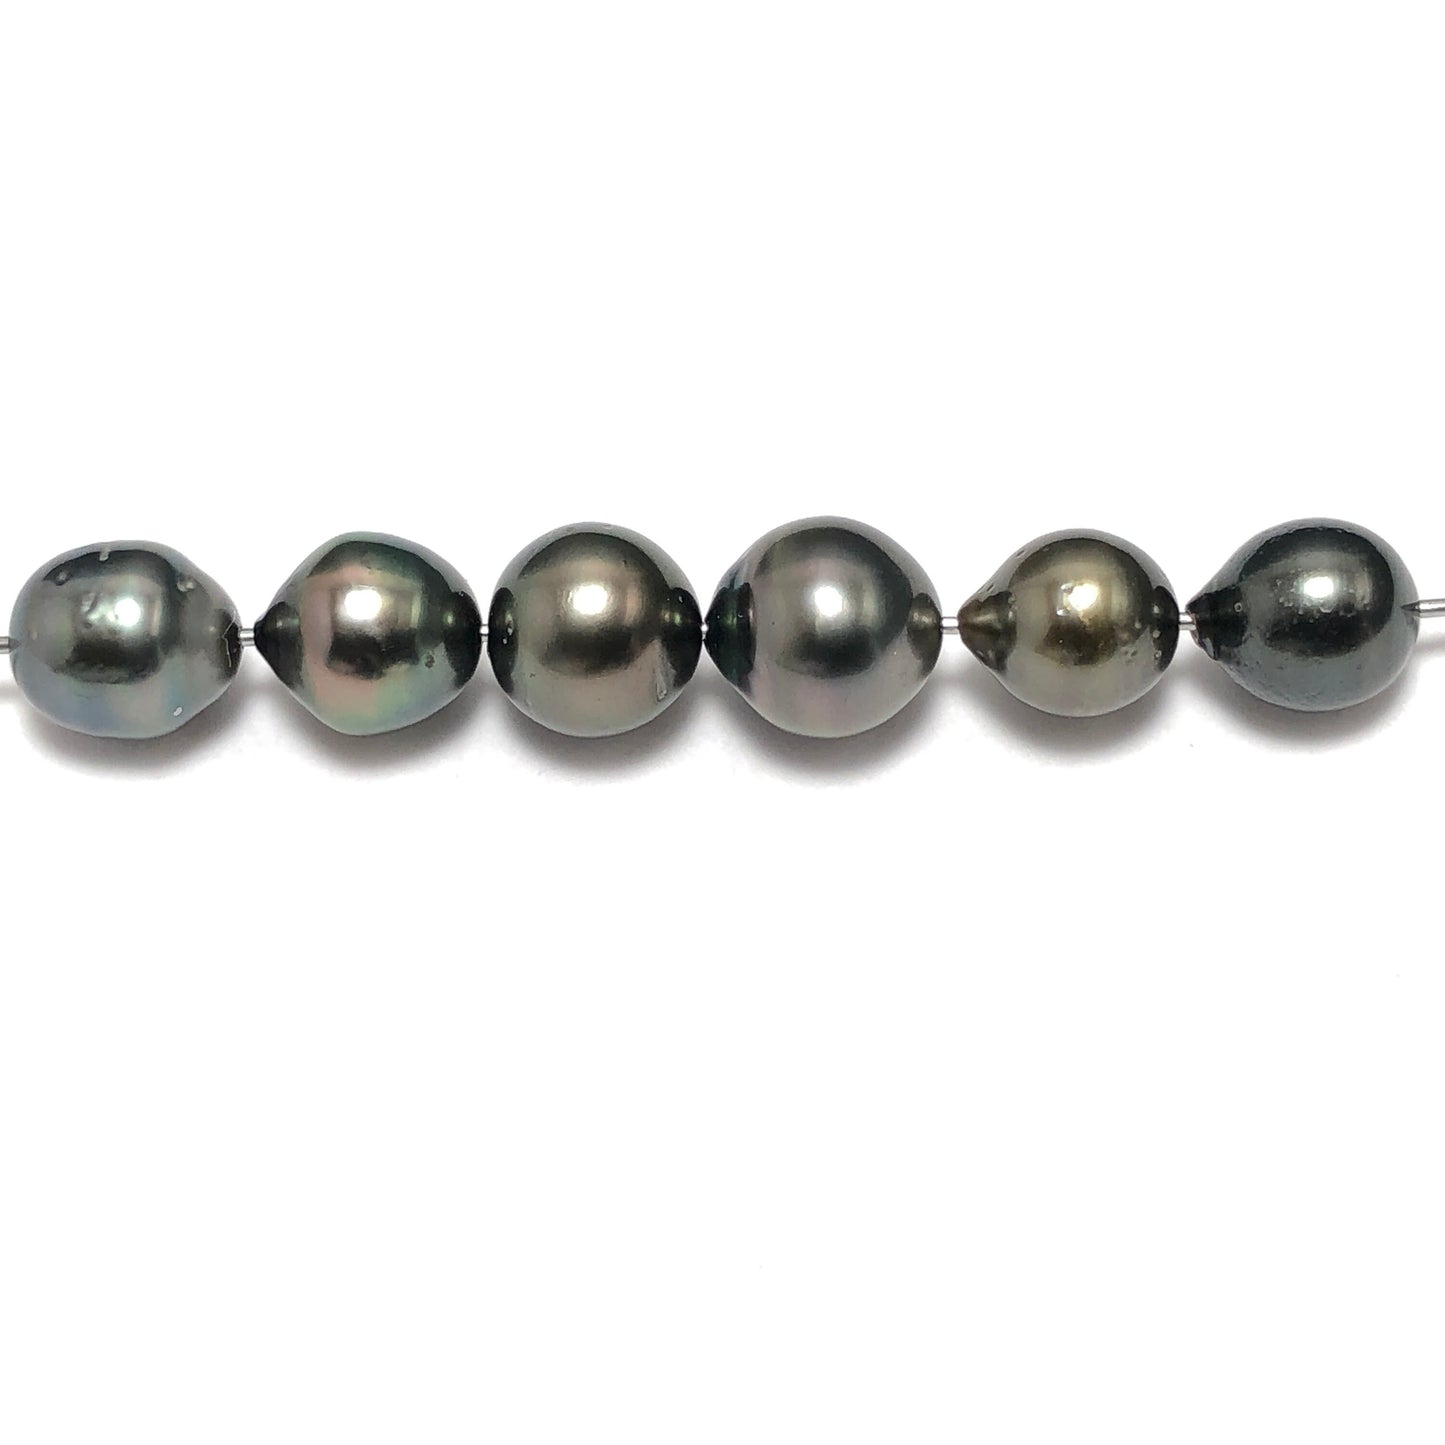 8-10mm Tahitian Pearls Semi Round, Original Hole or 2mm Hole, One Piece TAH001